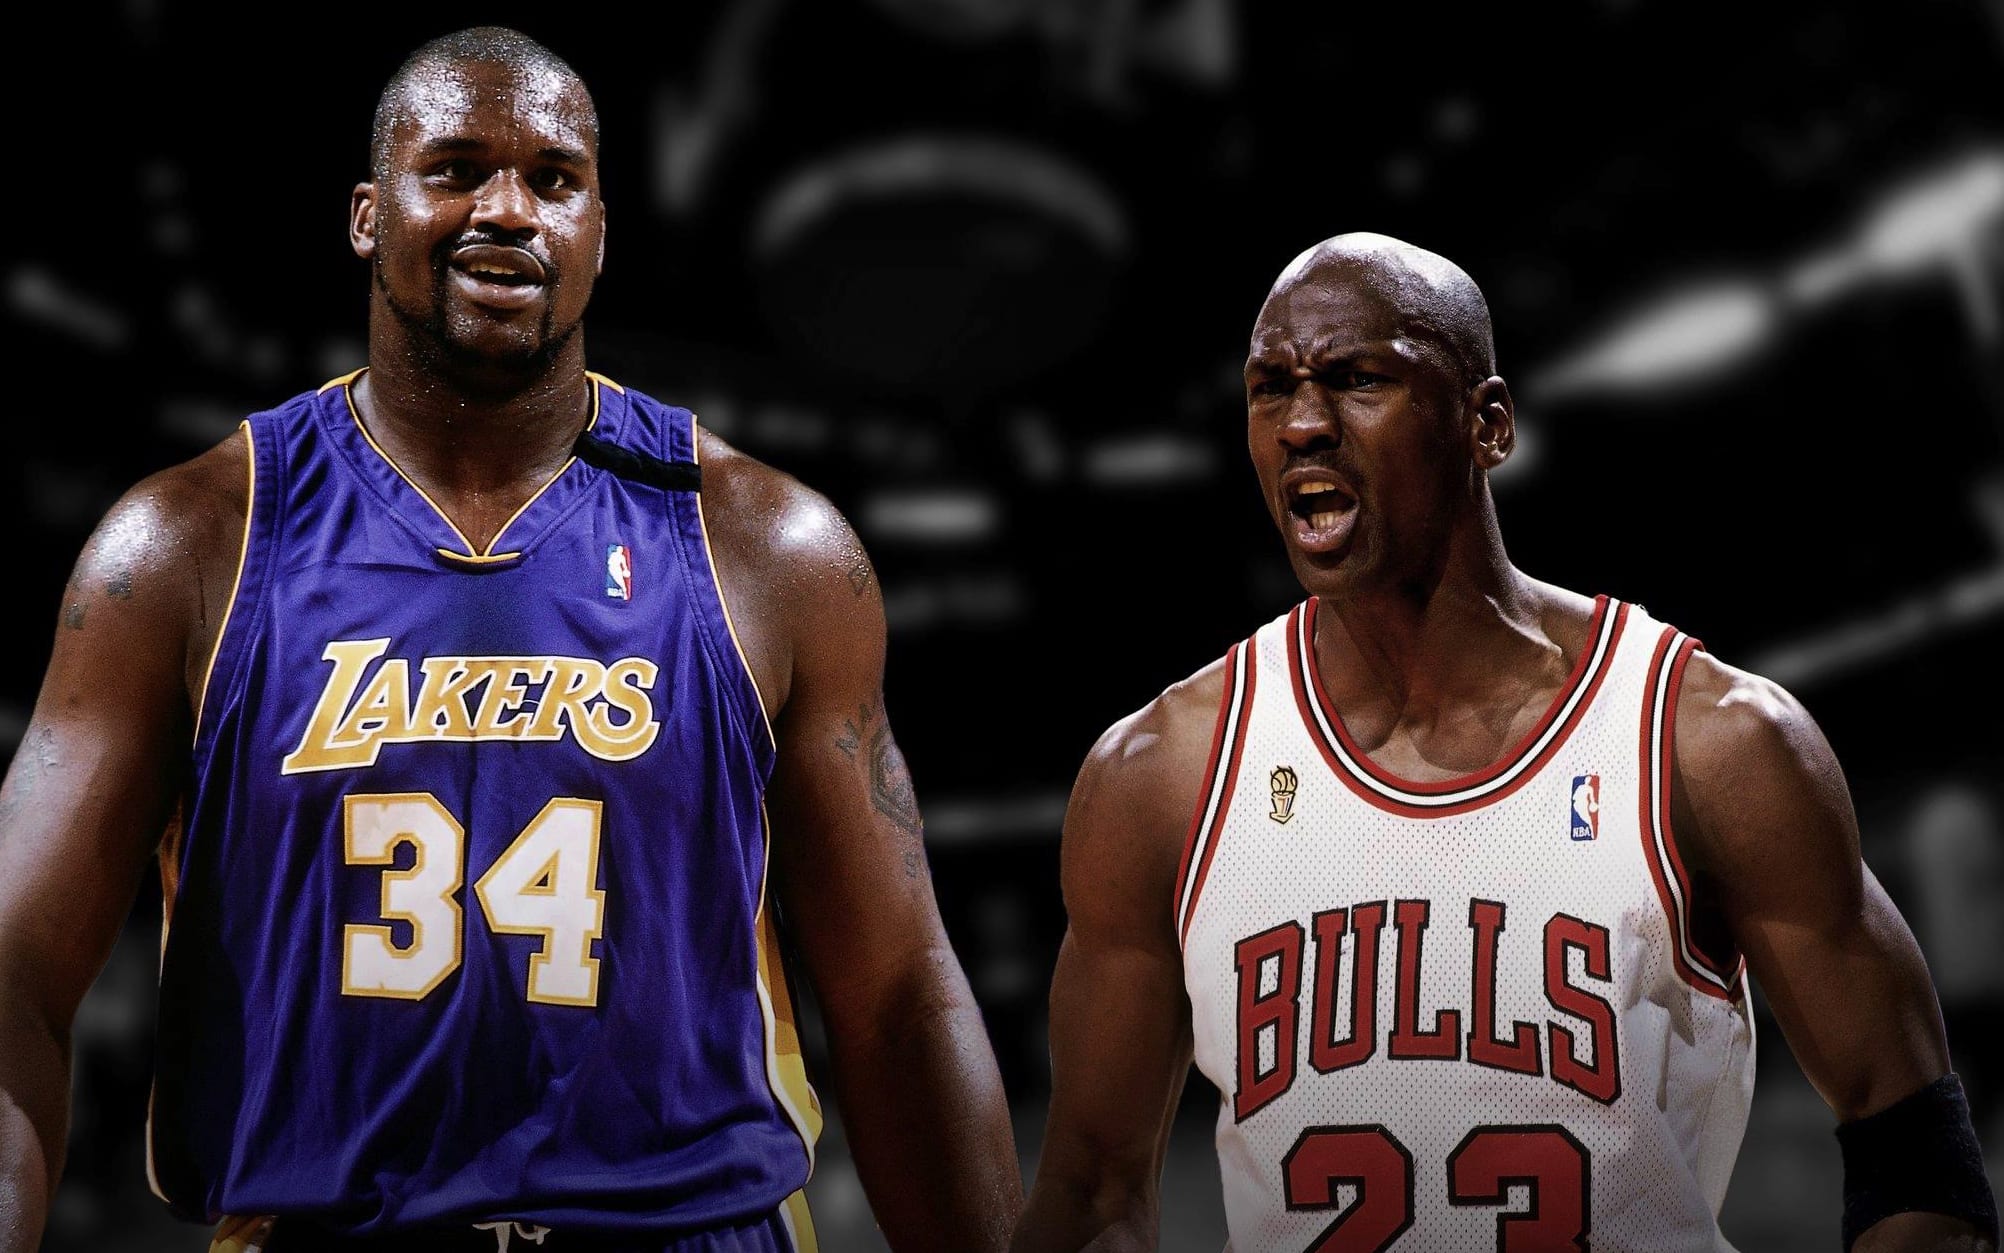 Shaq Explains How a Game Between His Lakers and Jordan’s Bulls Would Play Out